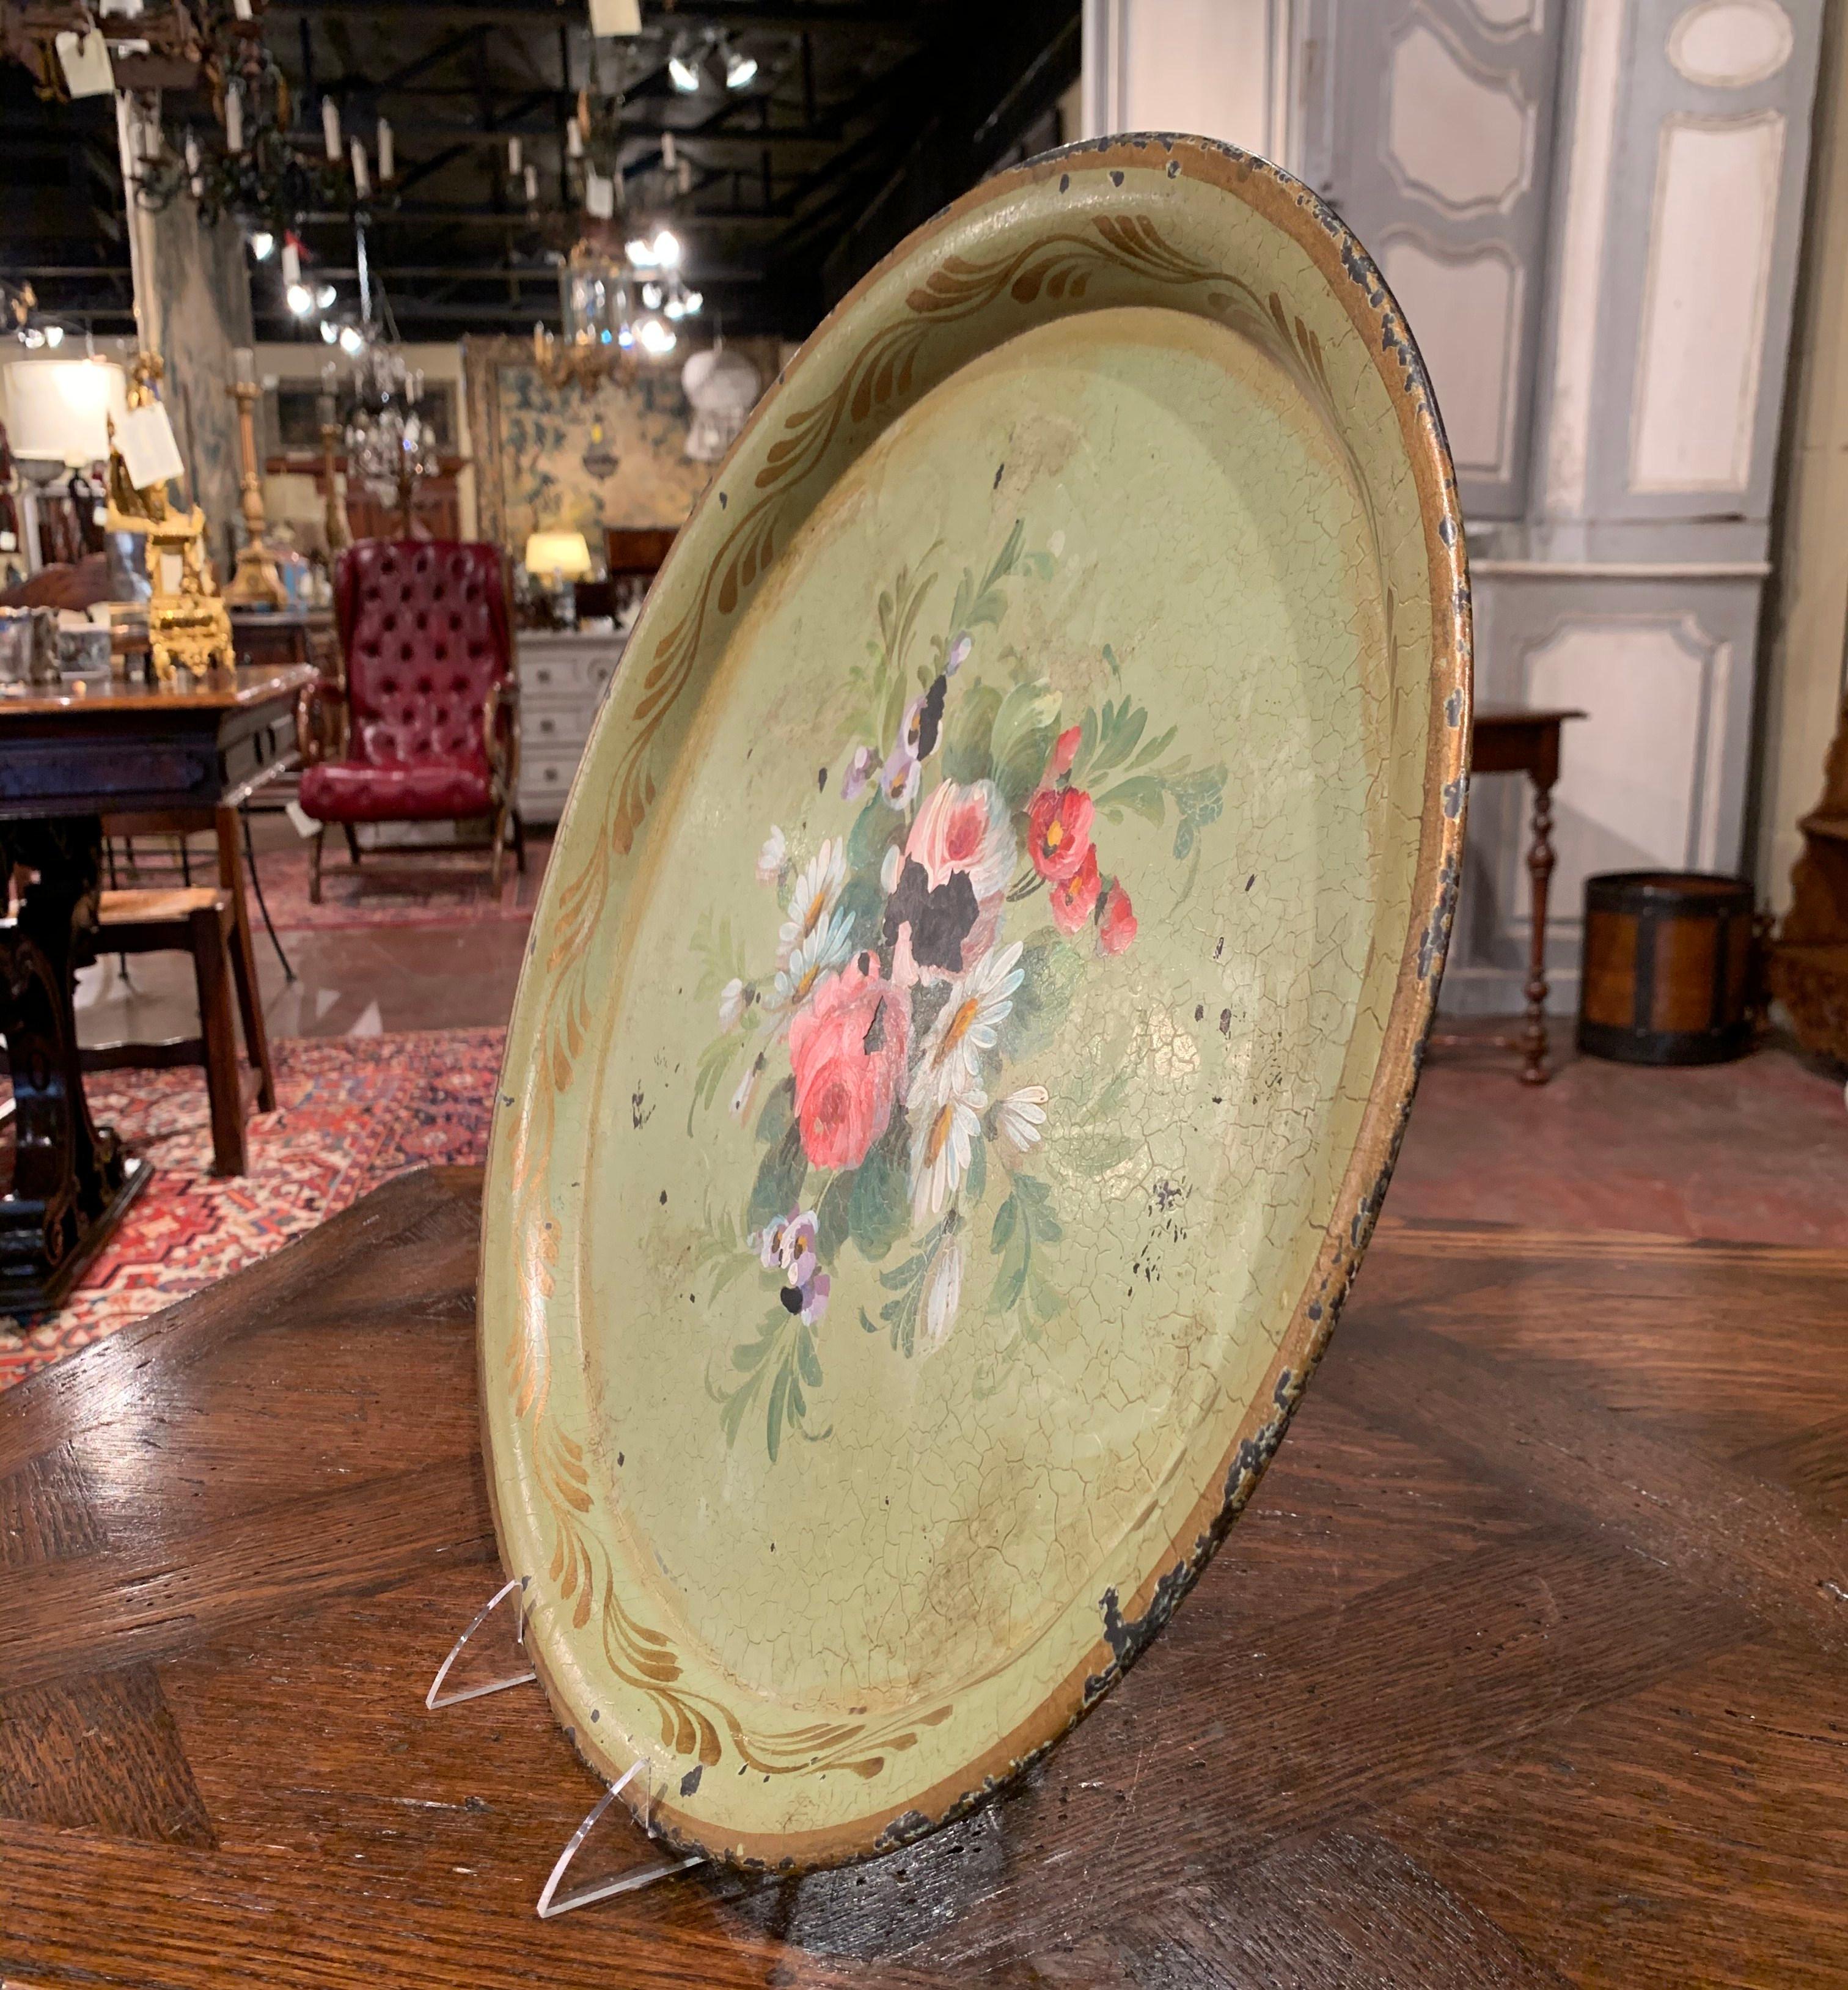 This antique tray was created in Normandy, France, circa 1870, round in shape, the colorful tray features hand painted flowers and leaves in the white and pink palette on a light green background, embellished with gilt accents. The tray table is in